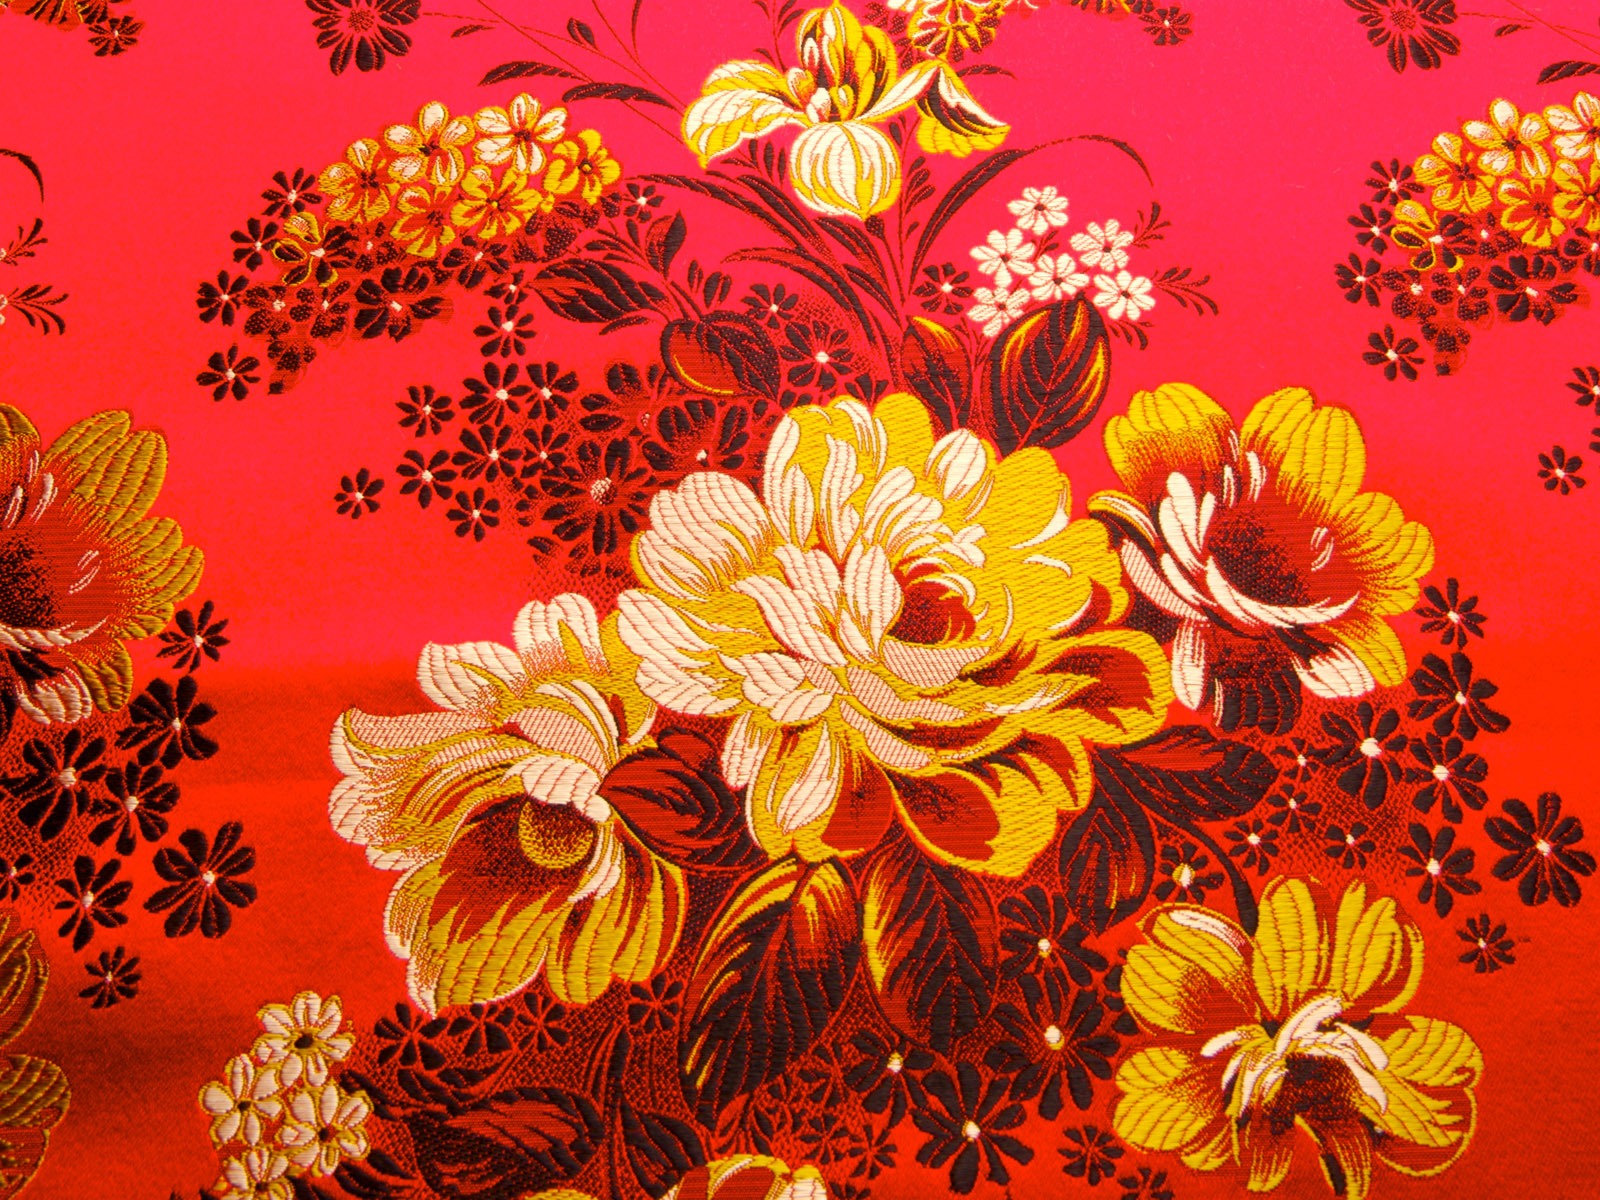 China Wind exquisite embroidery Wallpaper #9 - 1600x1200